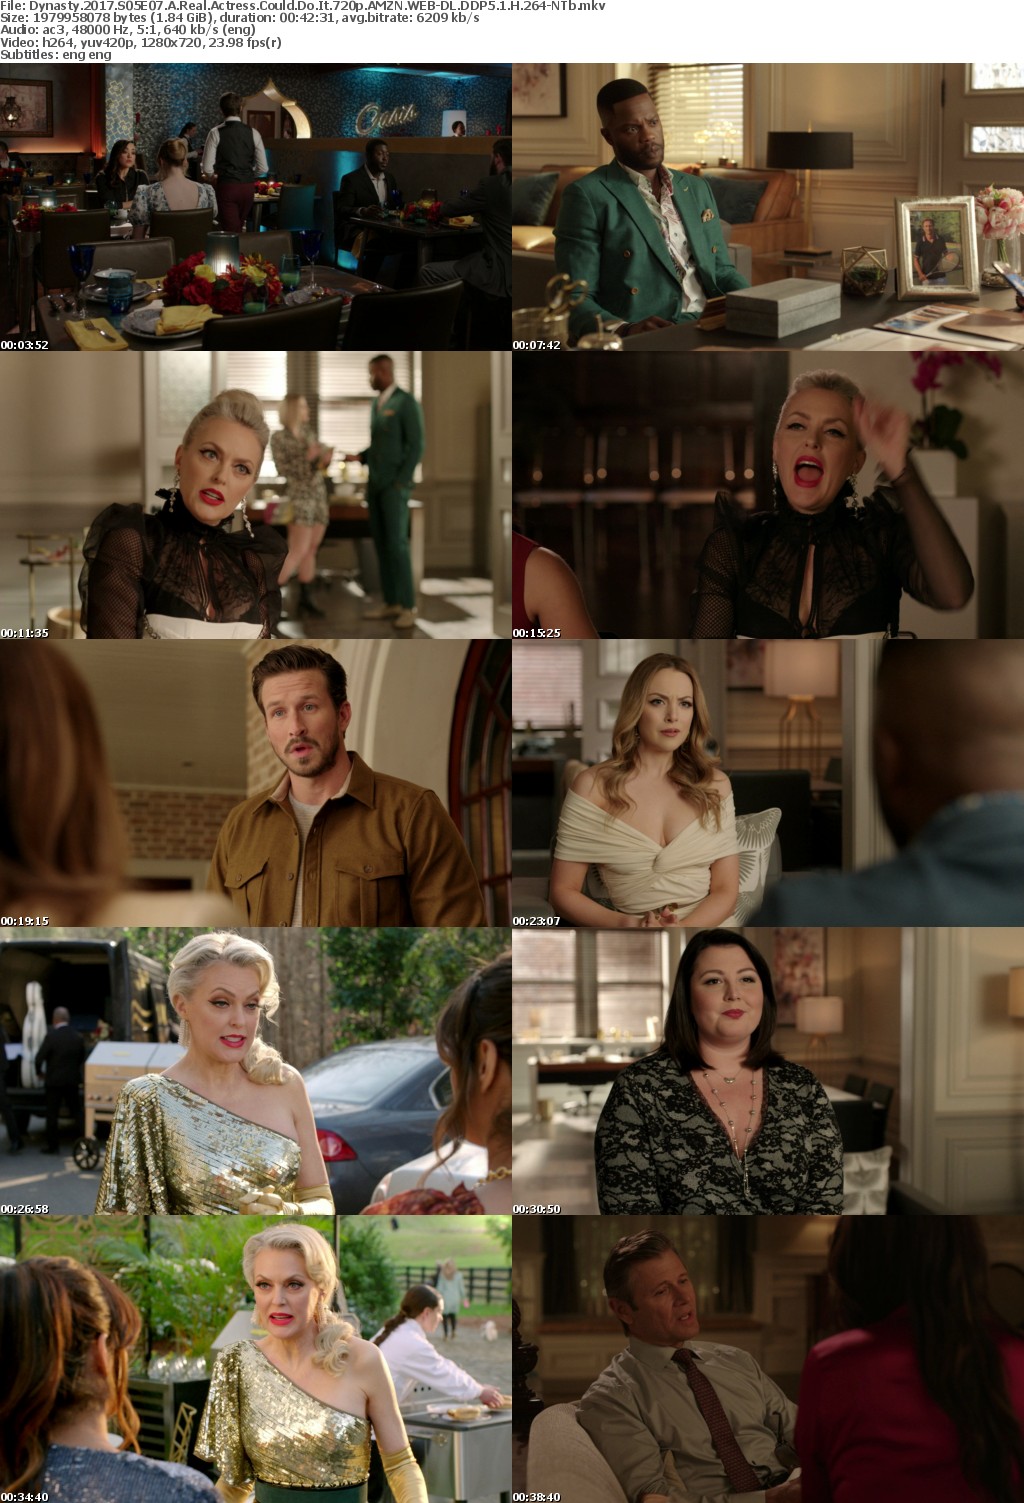 Dynasty 2017 S05E07 A Real Actress Could Do It 720p AMZN WEBRip DDP5 1 x264-NTb